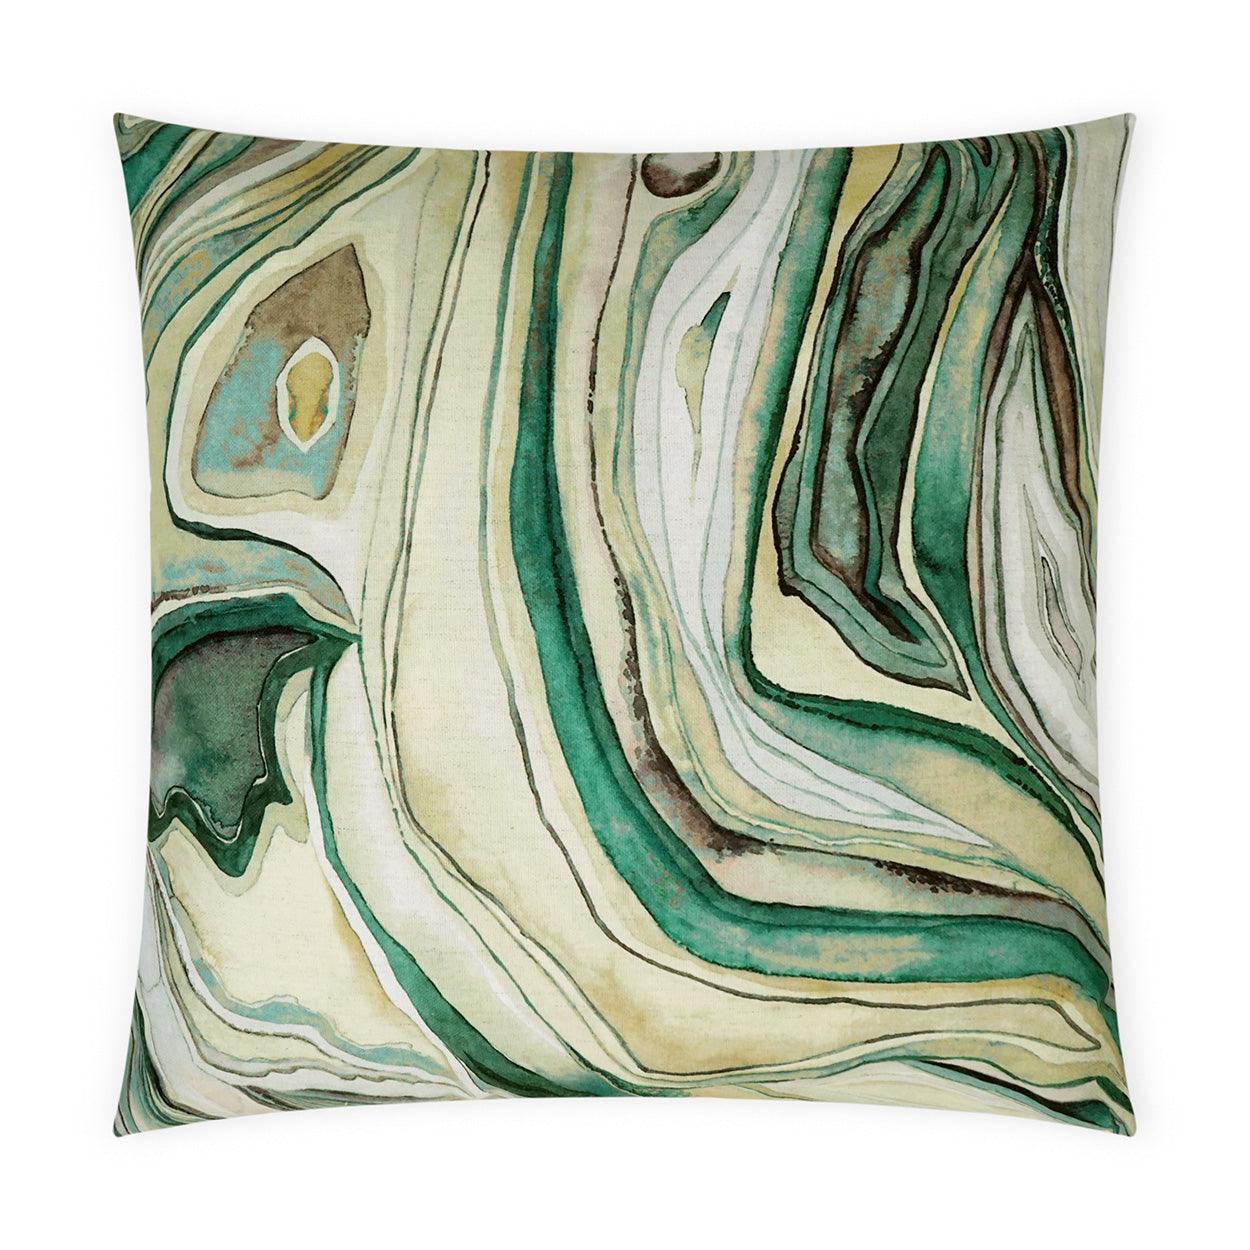 Sumidero Emerald Abstract Green Large Throw Pillow With Insert - Uptown Sebastian